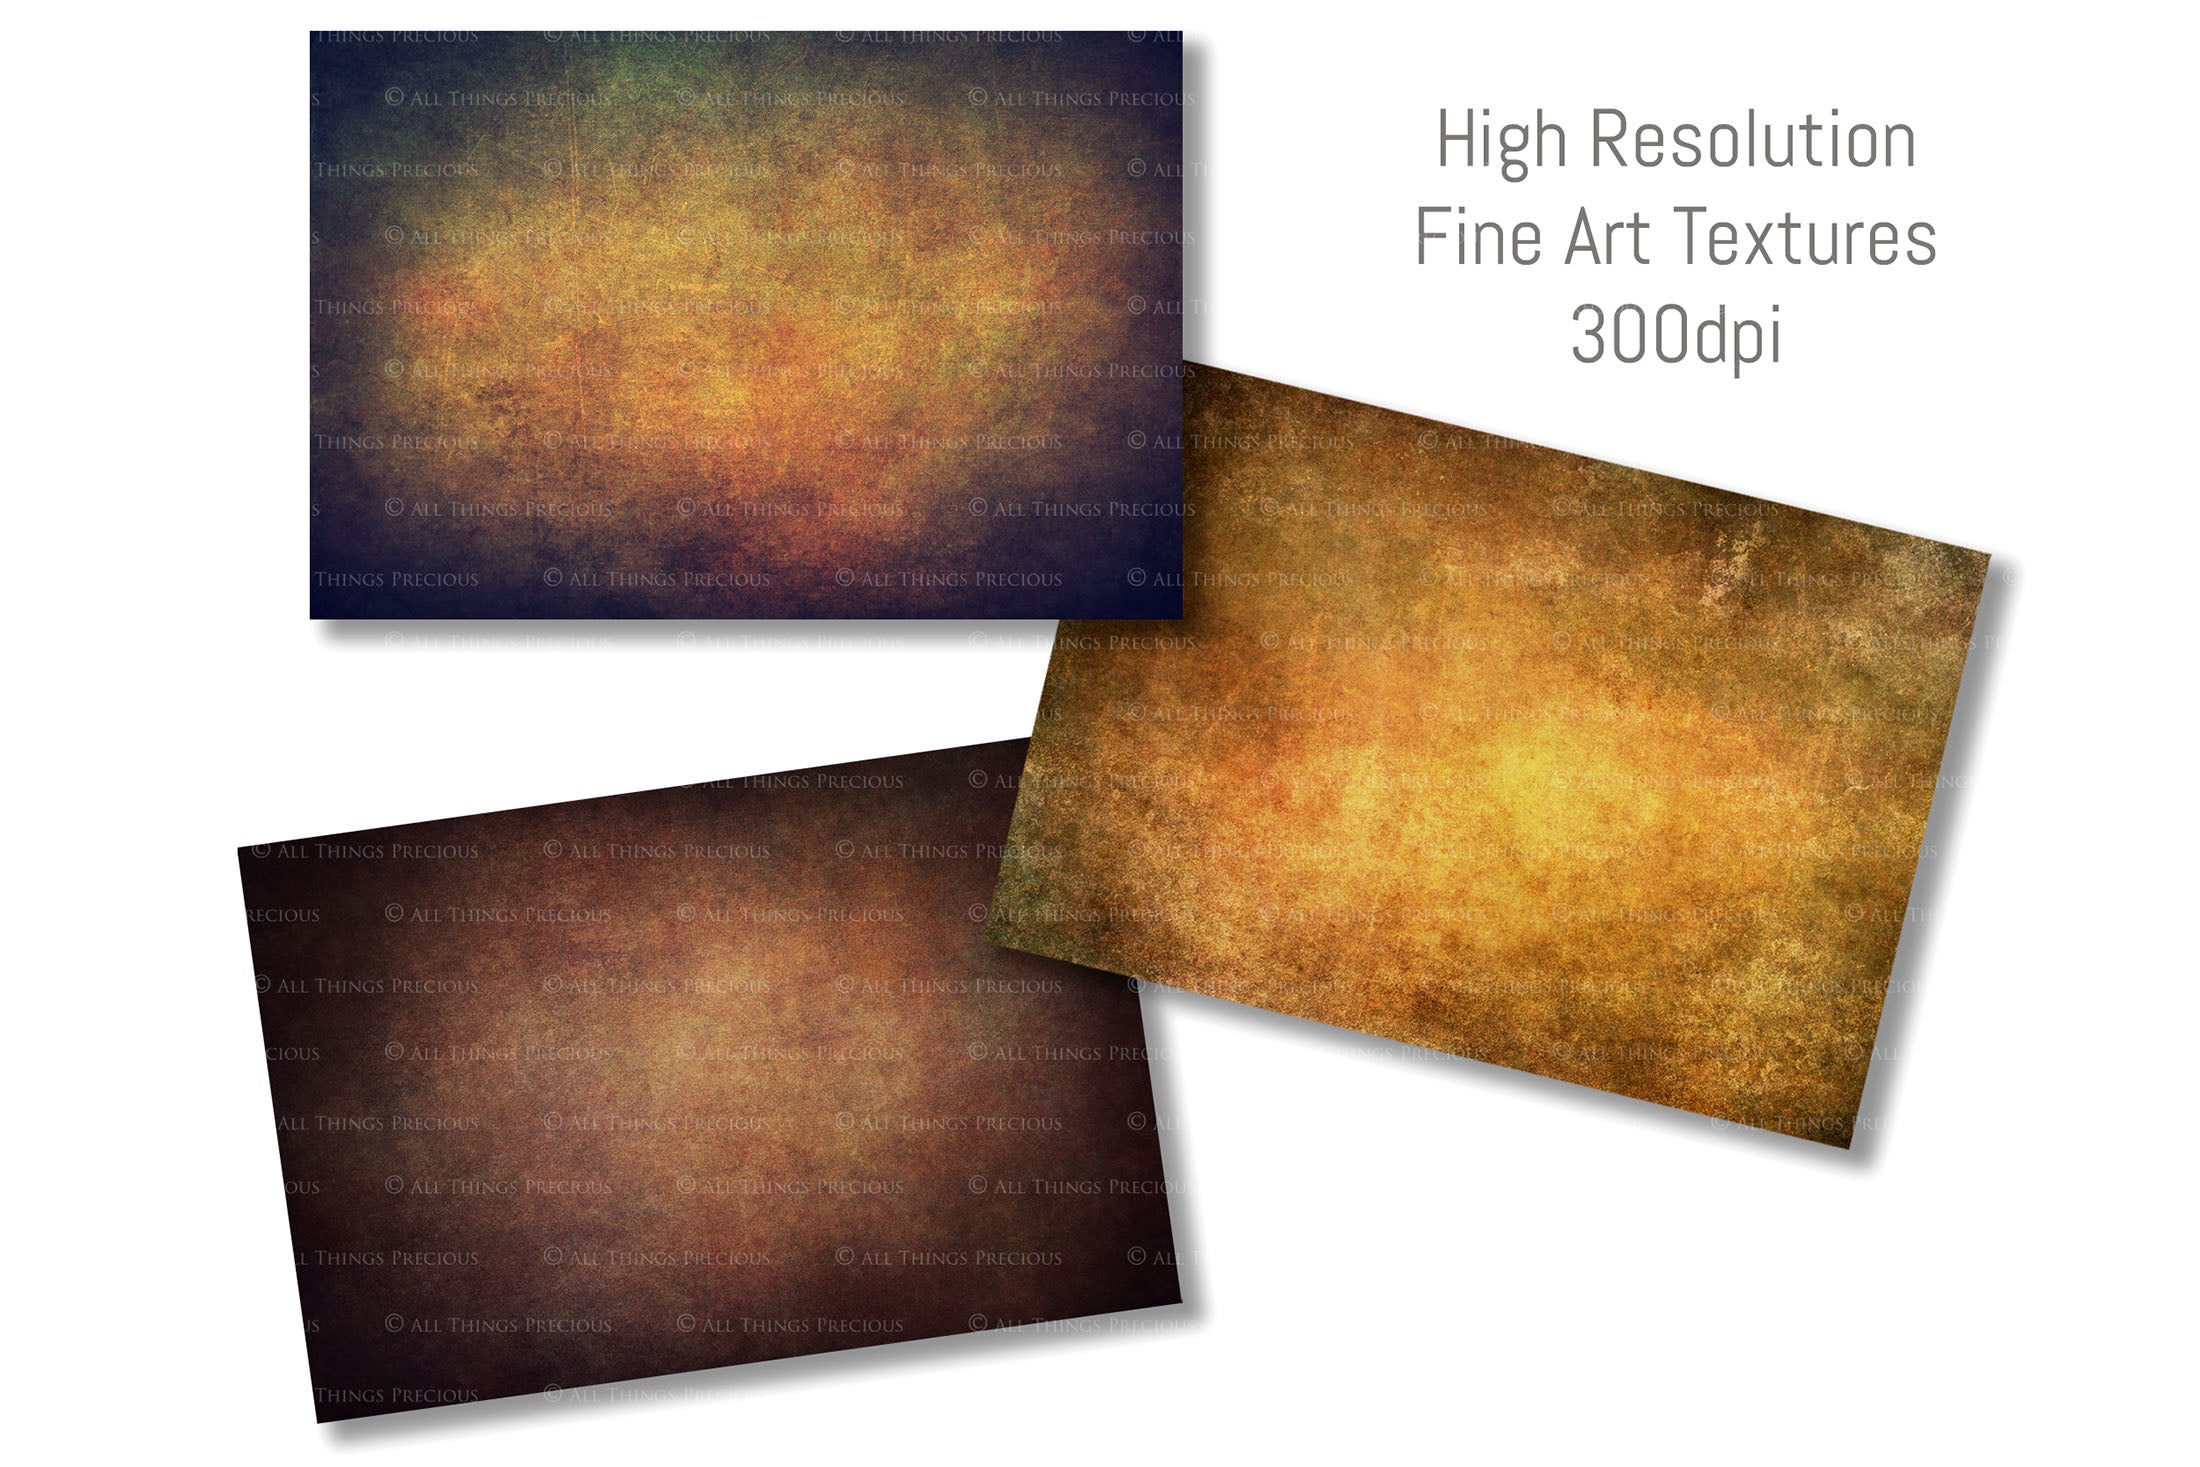 Fine Art Textures. For photography or print as backdrops. High resolution download files. Grunge, Warm, Light, Digital Add Ons. Canvas, Dark, Painterly, Color design. Digital Background Jpeg overlay. Scrapbooking Paper, Printable Wall Art, Photoshop editing Graphic Assets. by ATP textures.